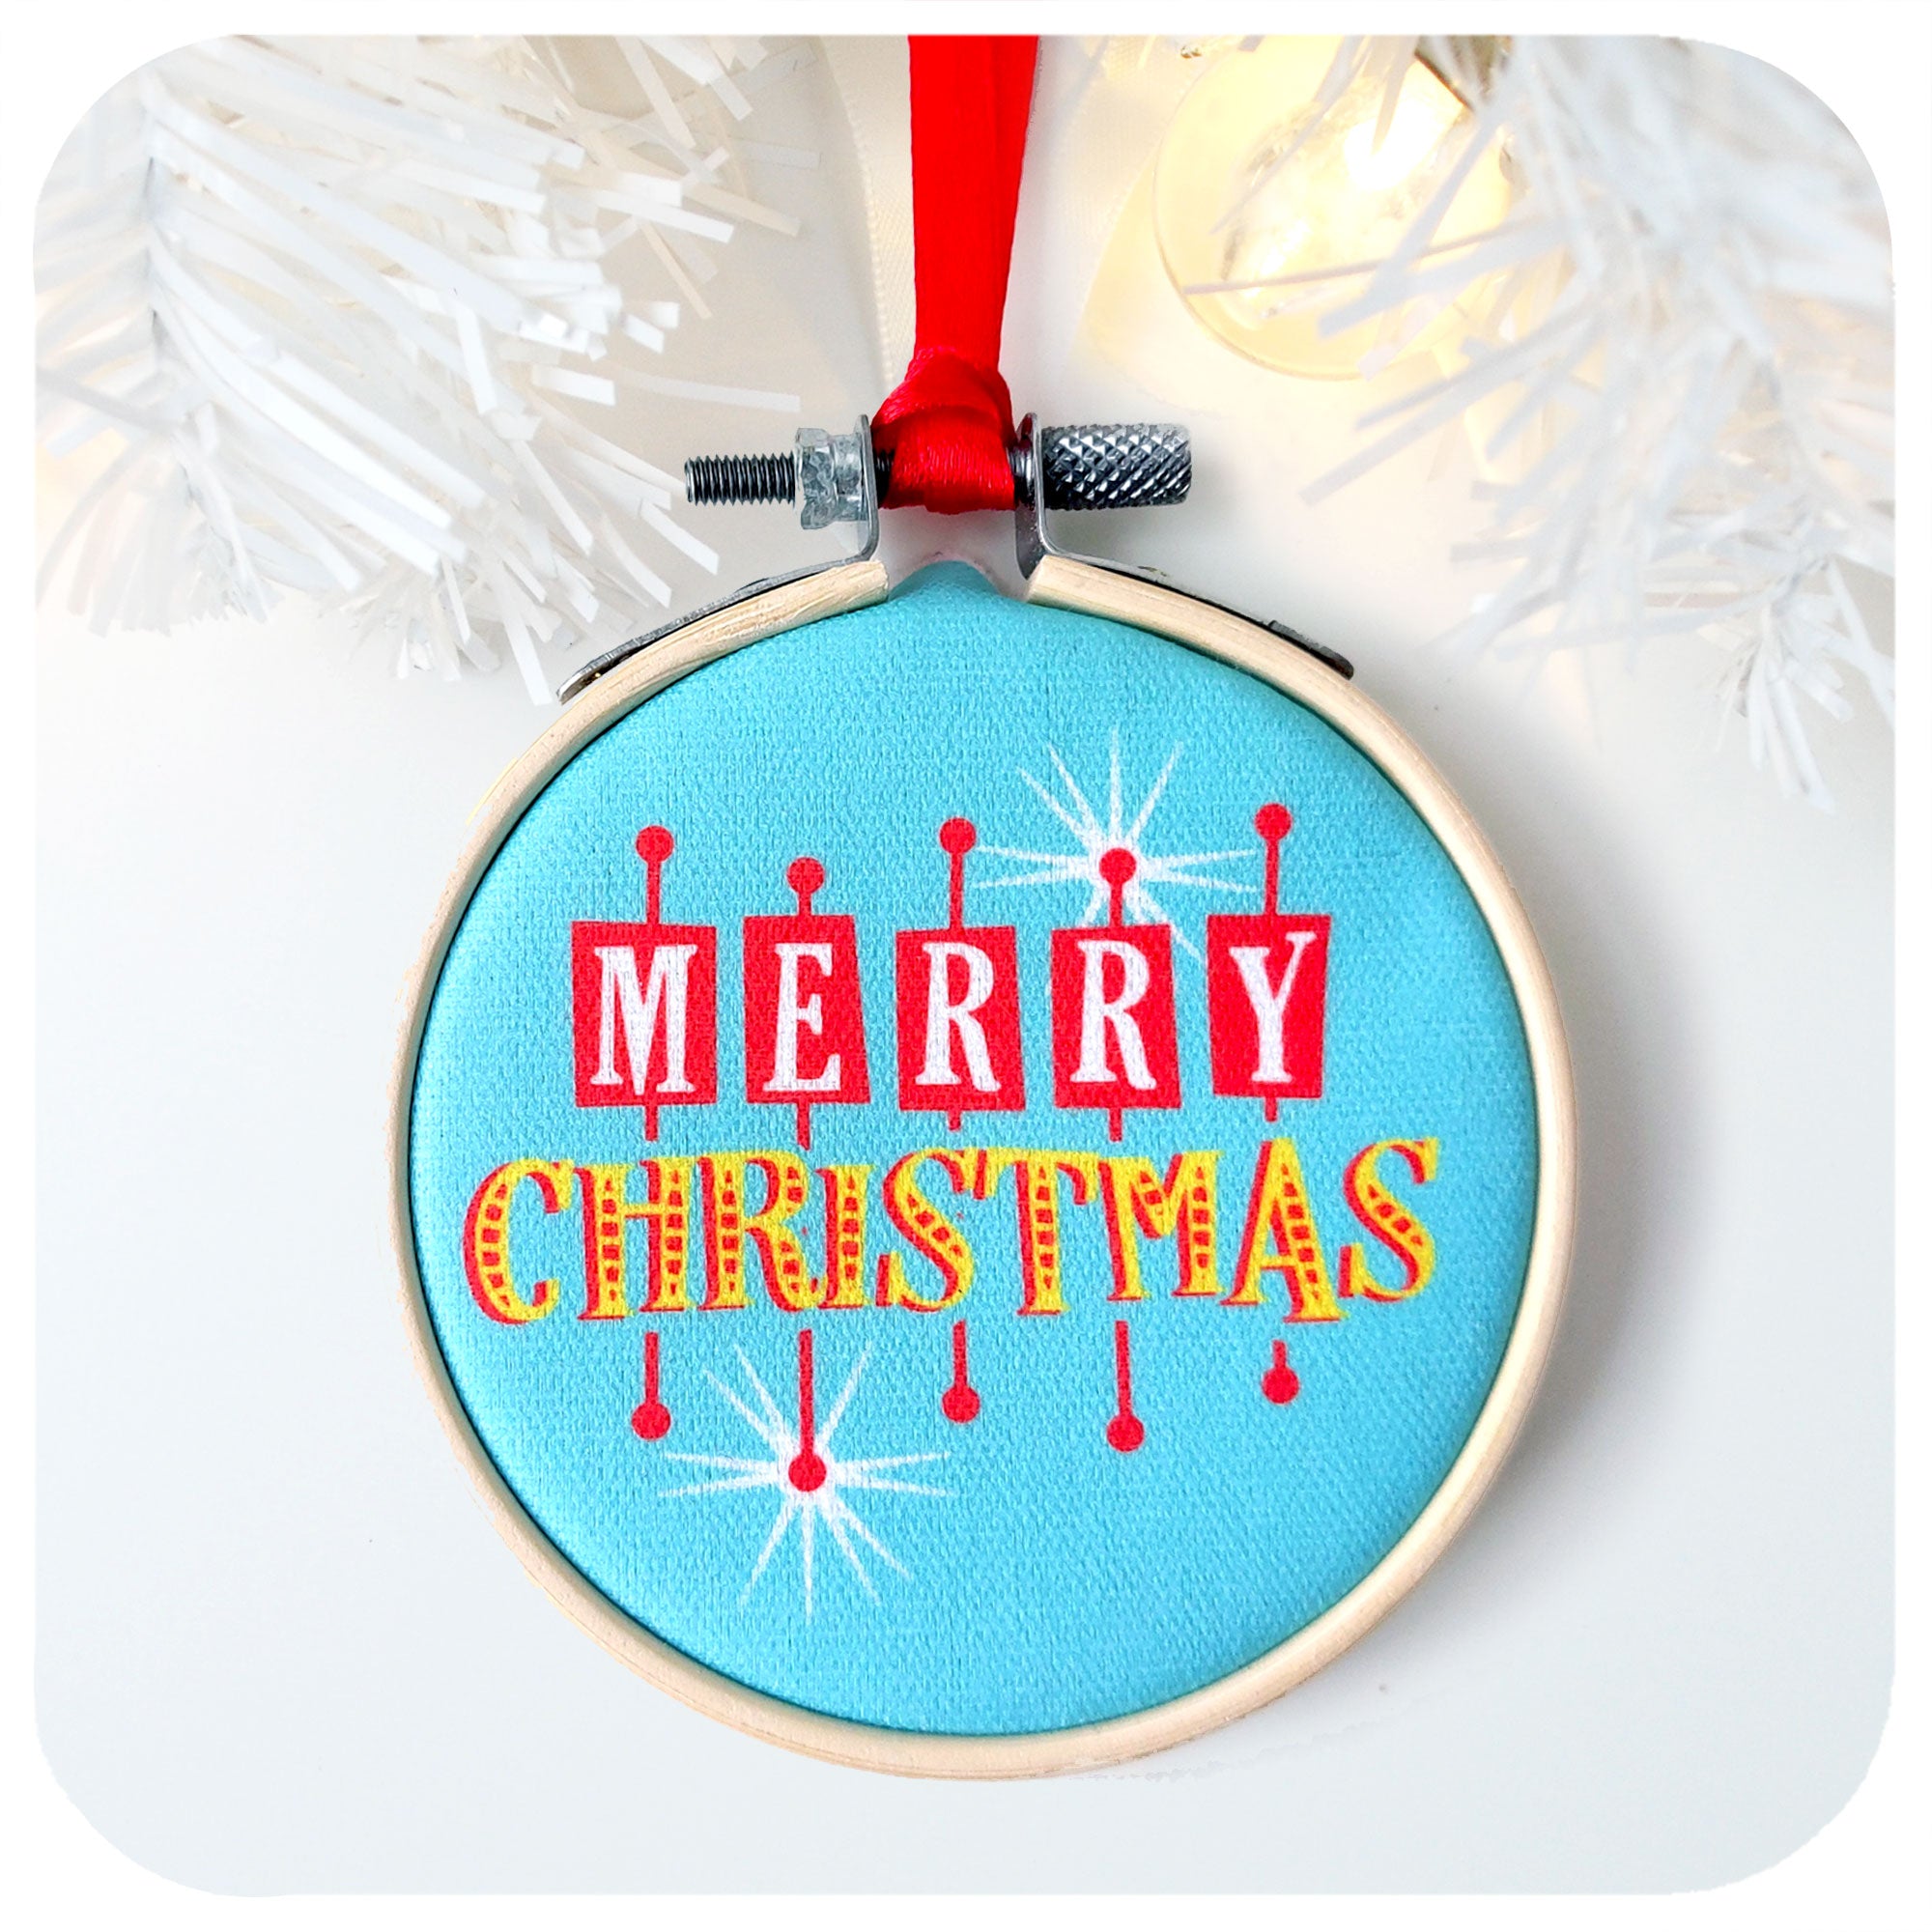 A printed fabric Christmas tree decoration in the style of a vintage las vegas sign on a white background with white christmas tree branch and fairy light | The Inkabilly Emporium